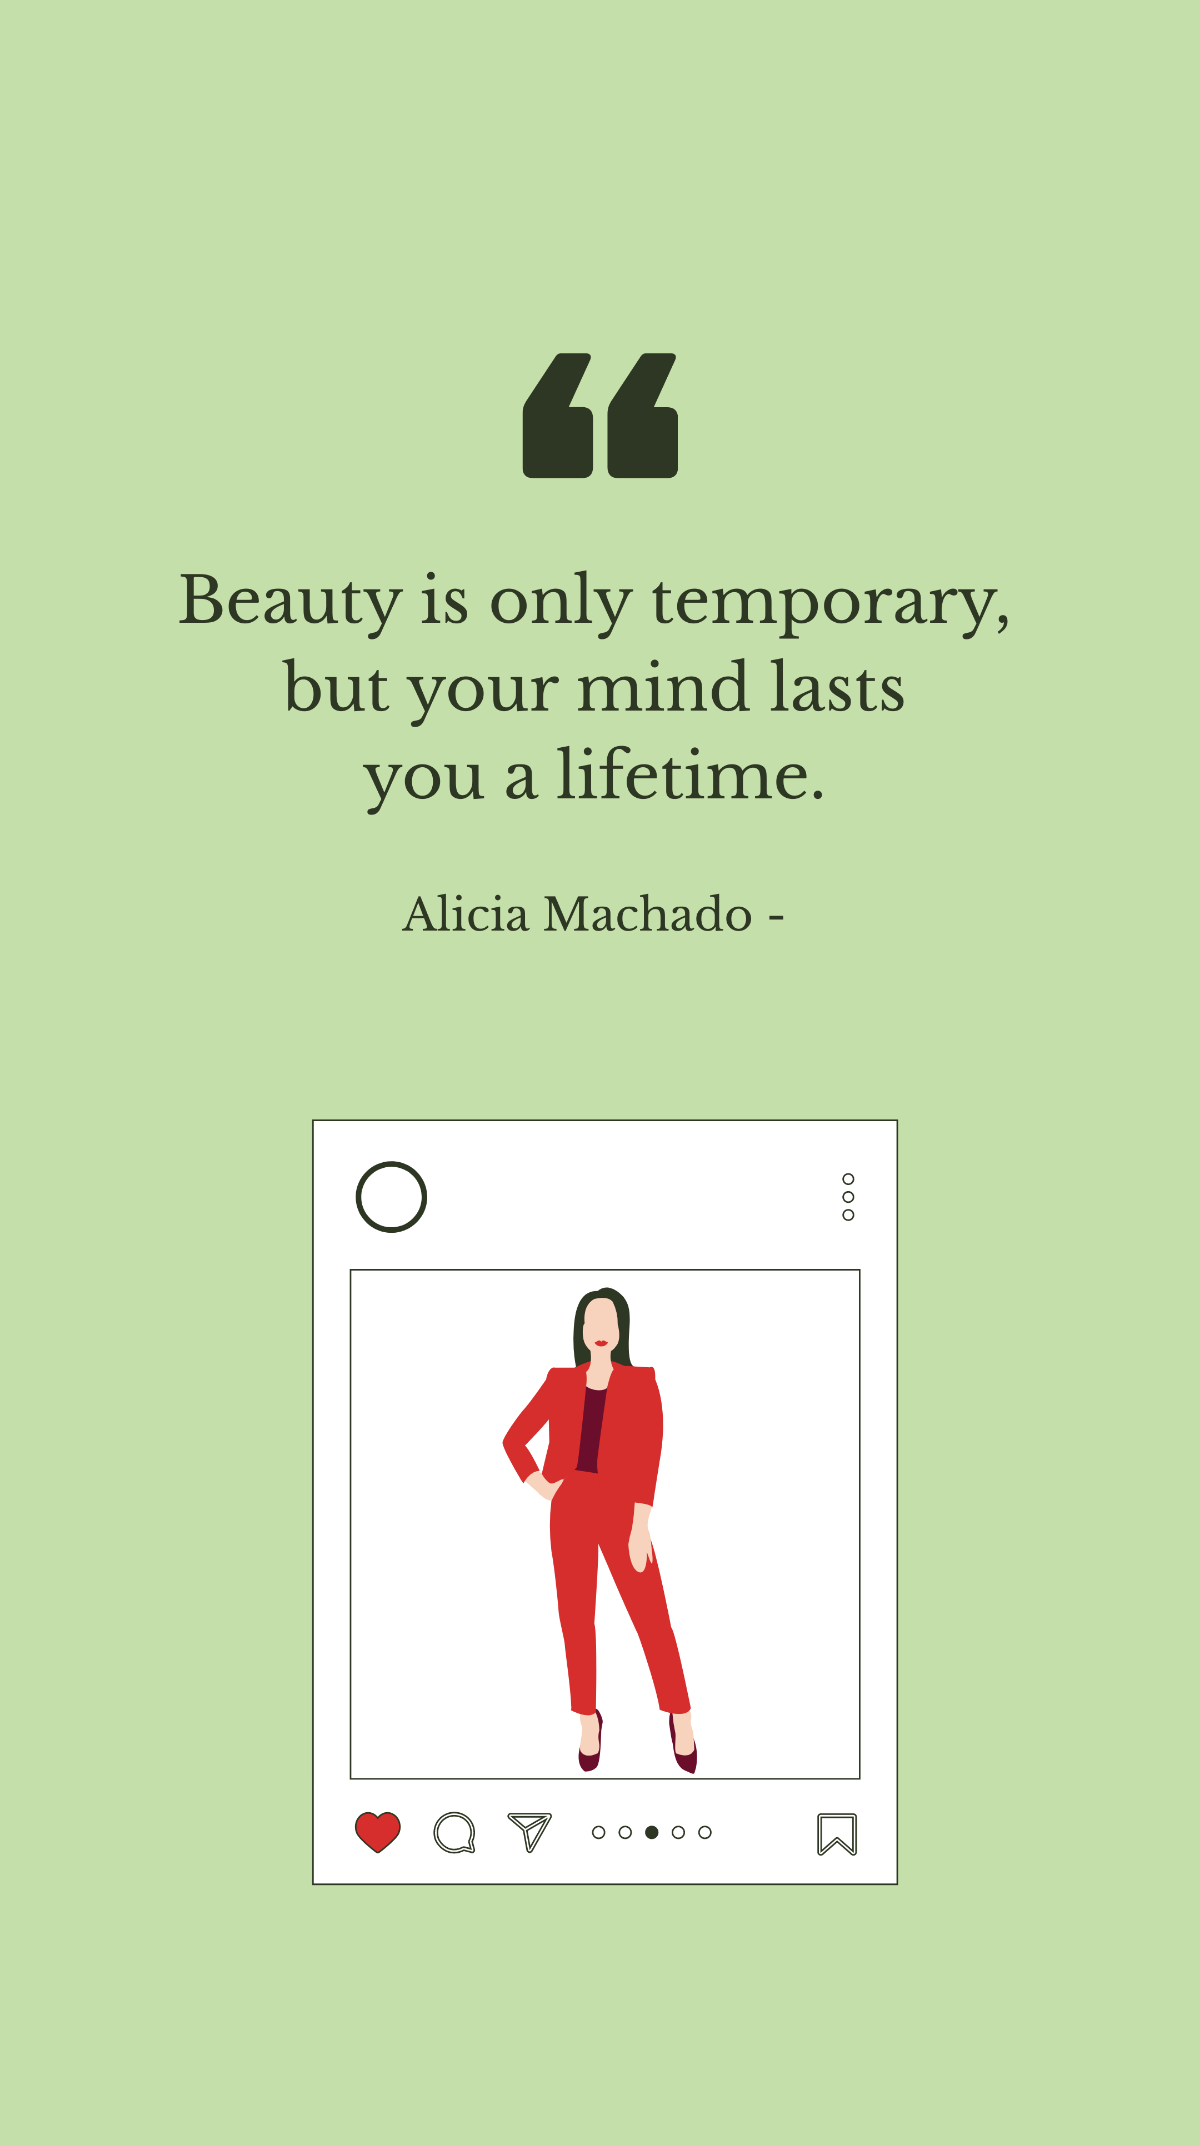 Alicia Machado - Beauty is only temporary, but your mind lasts you a lifetime. Template